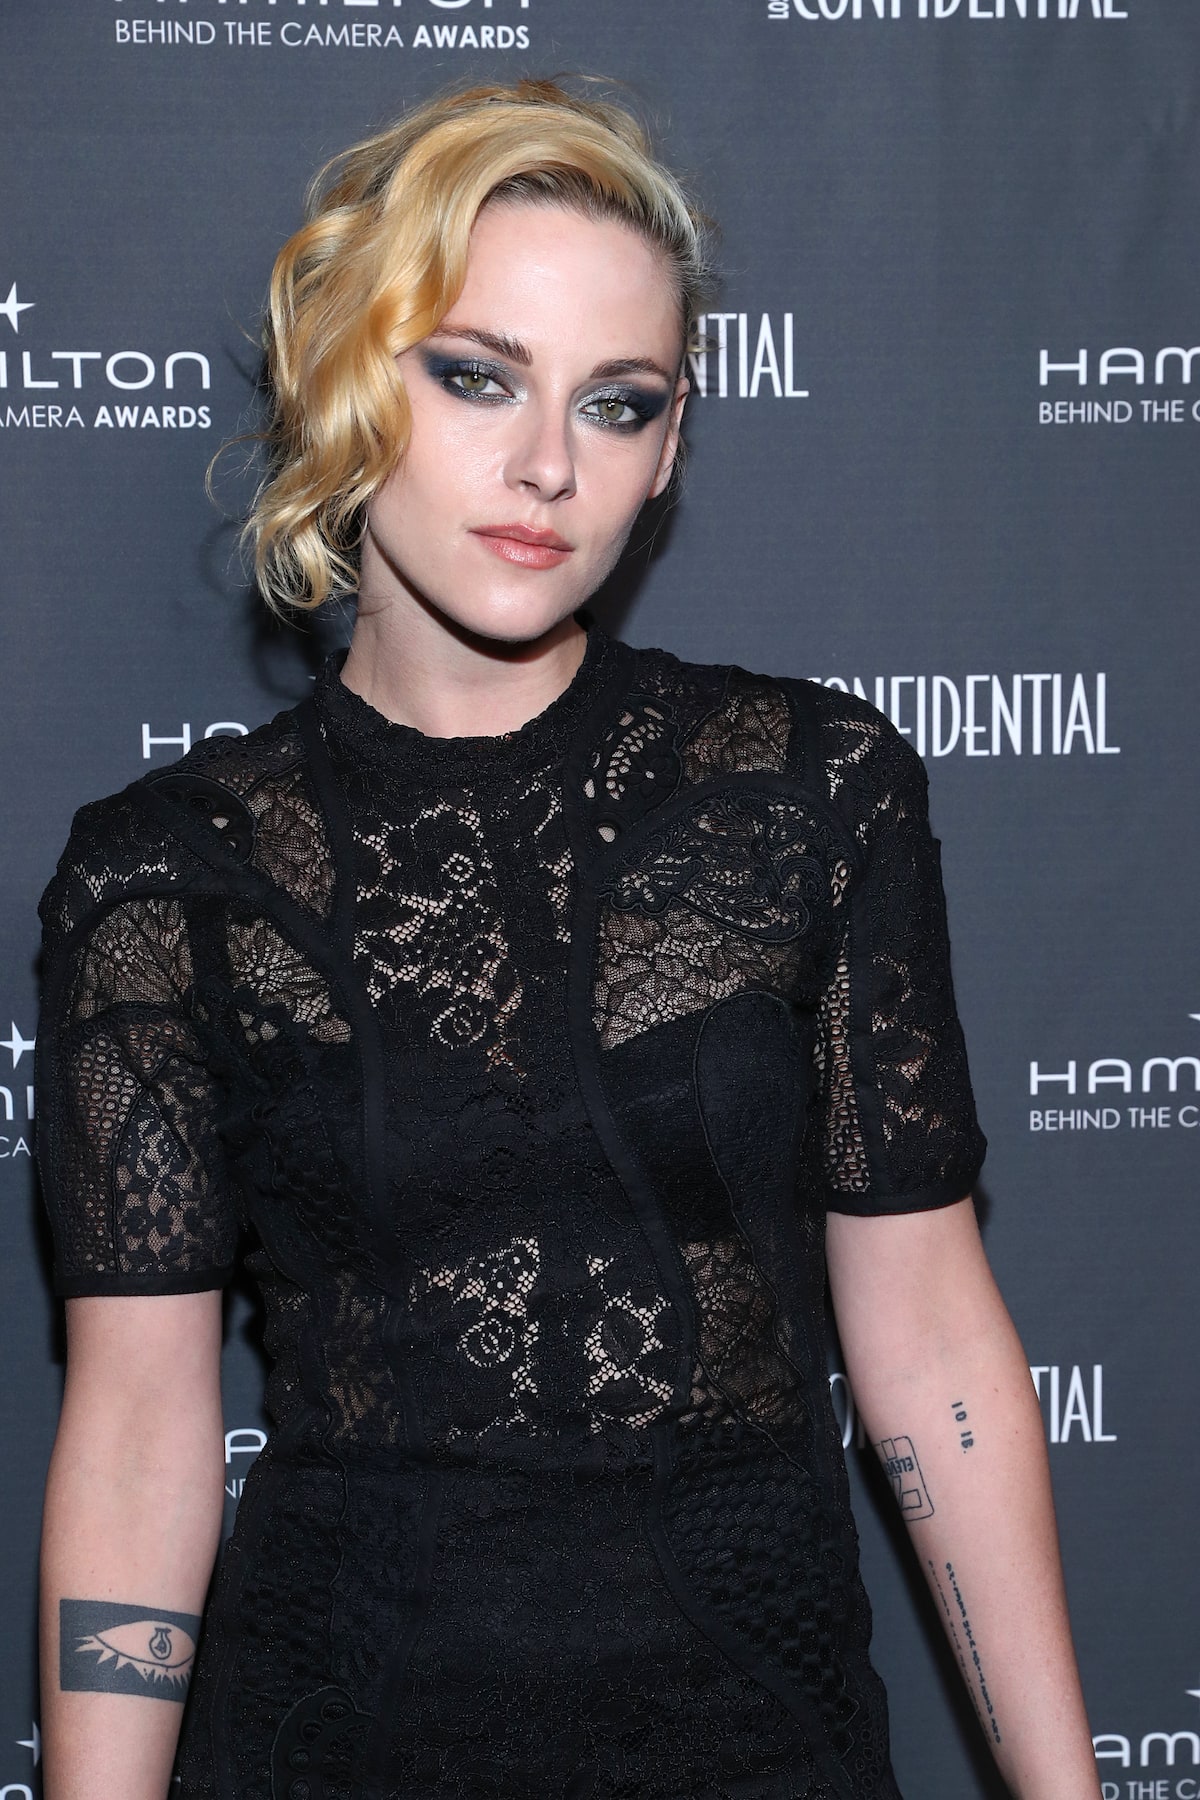 Is Kristen Stewart gay or bi? Who is her current partner, Dylan Meyer? pic picture